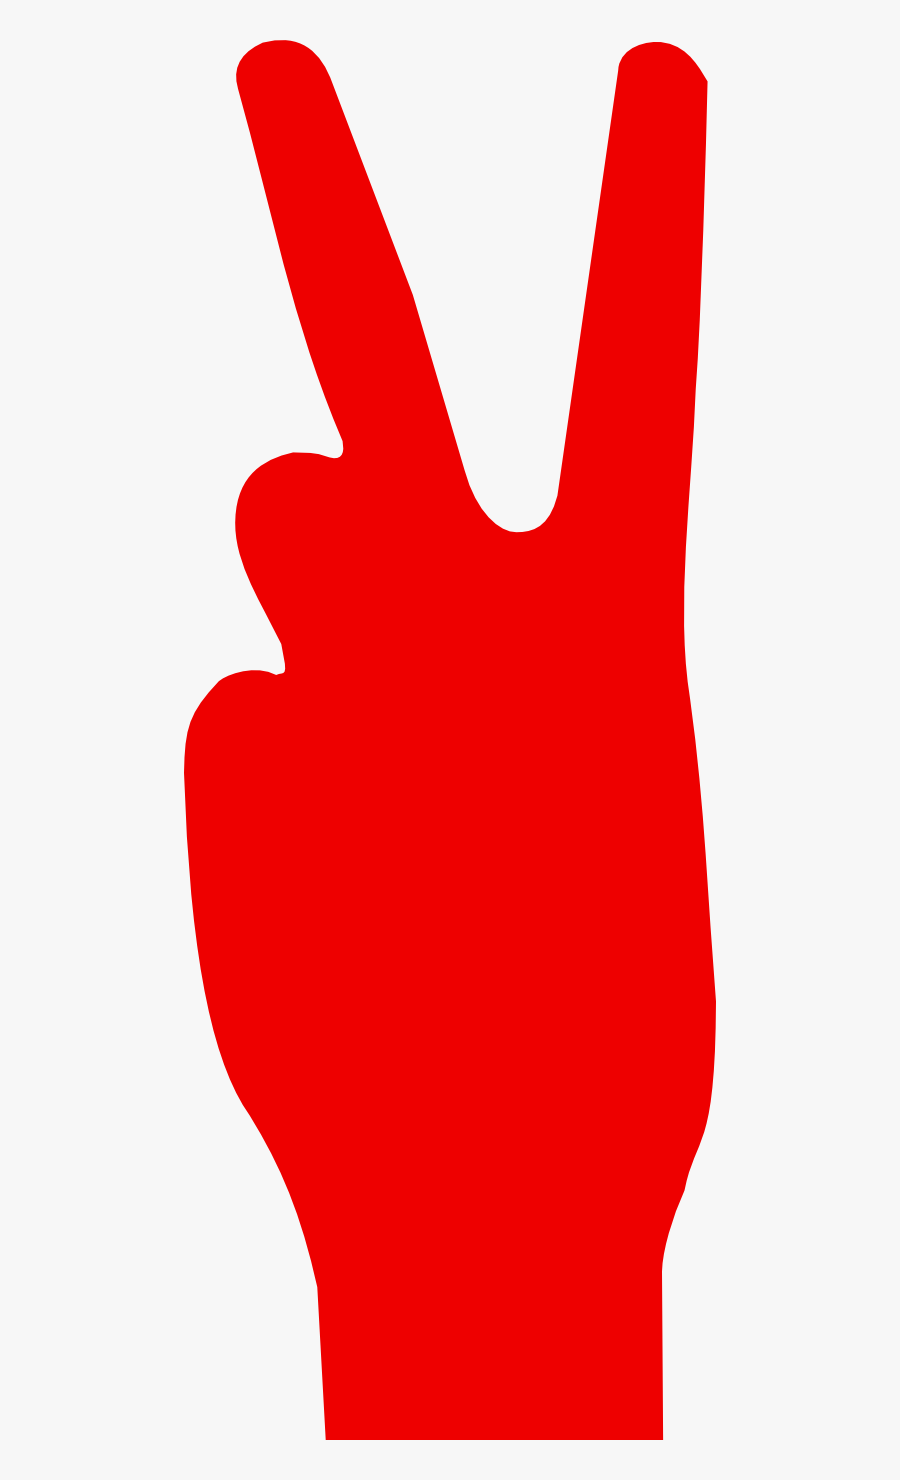 Free Alien Download Clip - Red Peace Sign Background, Transparent Clipart